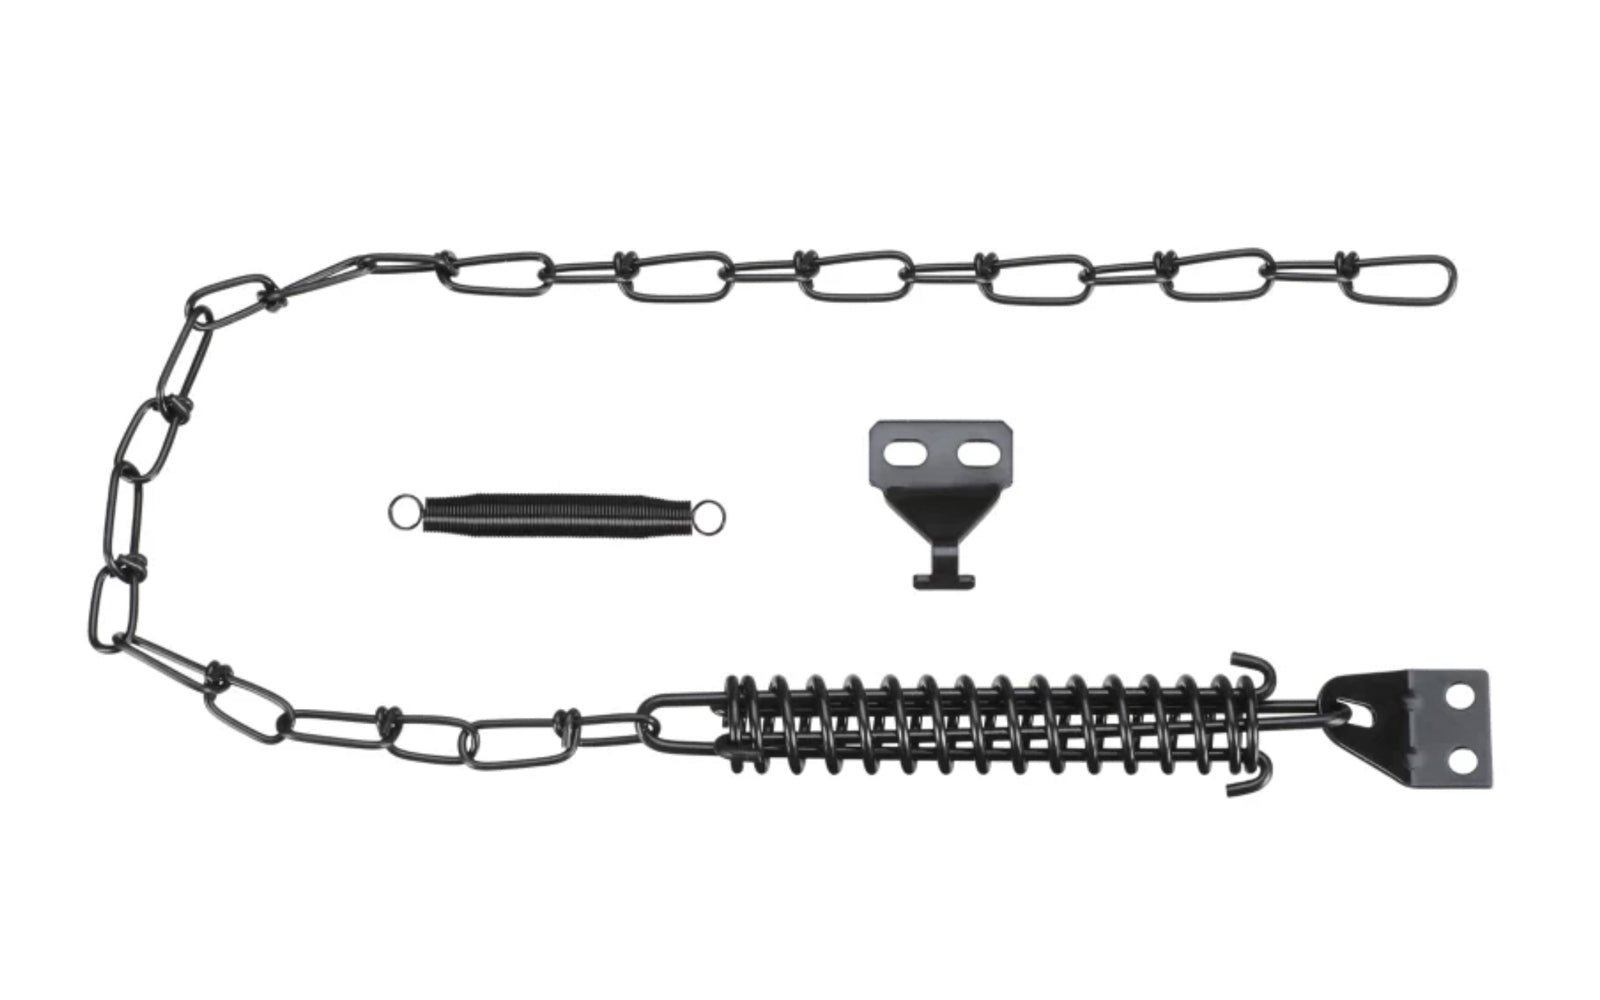 Steel brackets & chain; spring steel. Black finish. Designed to absorb shock, preventing wind damage to screen & storm doors & door closers. National Hardware Catalog Model No. N349-241. 038613349247